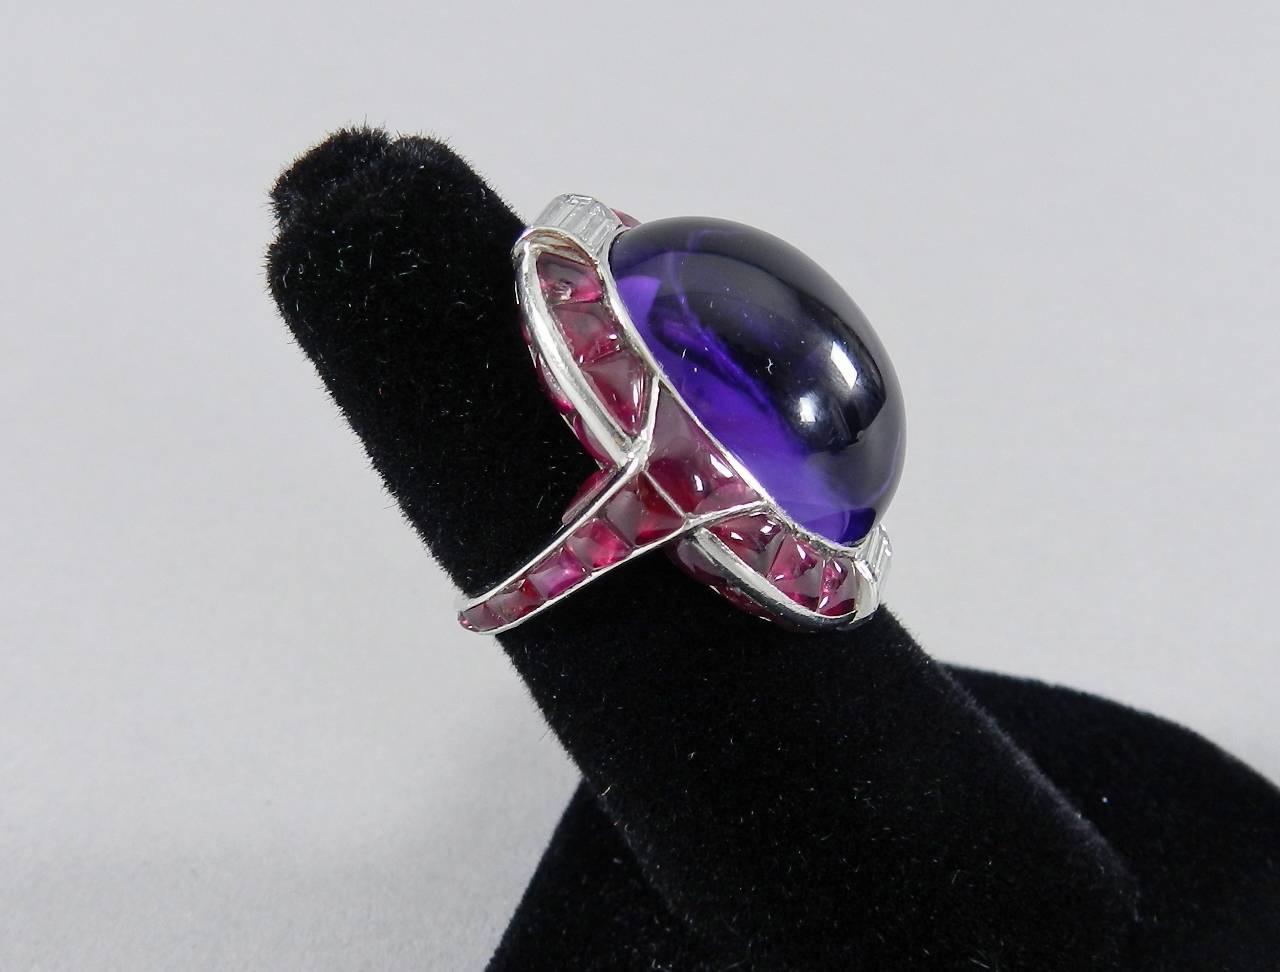 Verdura 1930’s vintage Art Deco platinum cocktail ring with ruby, diamond, and amethyst cabochon. Ring size 6 ¼. Decorated with rubies on reverse of ring and on exterior band. Approximately 8-10 carats of ruby, 23.31 carats amethyst cabochon, 1